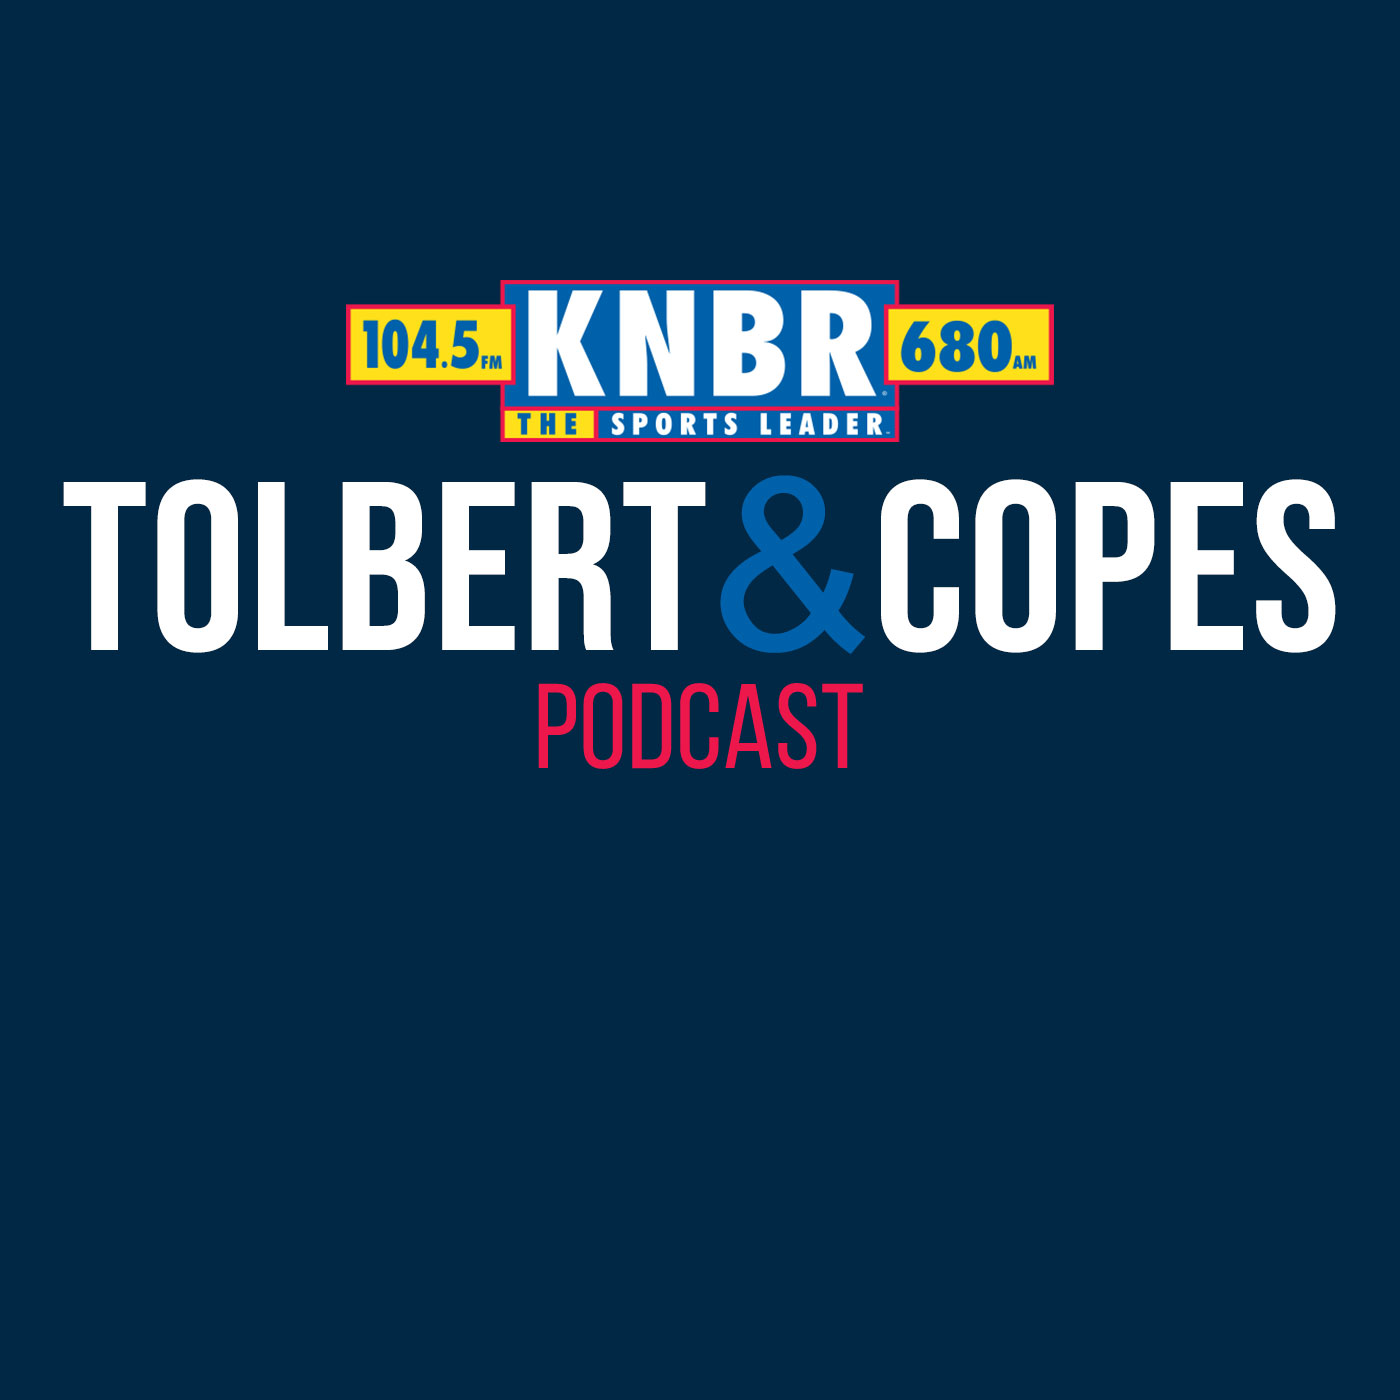 10-19 PJ Carlesimo joins Tolbert & Copes to review last night's Warriors game and relates his own experiences in how a team can get past a very public altercation